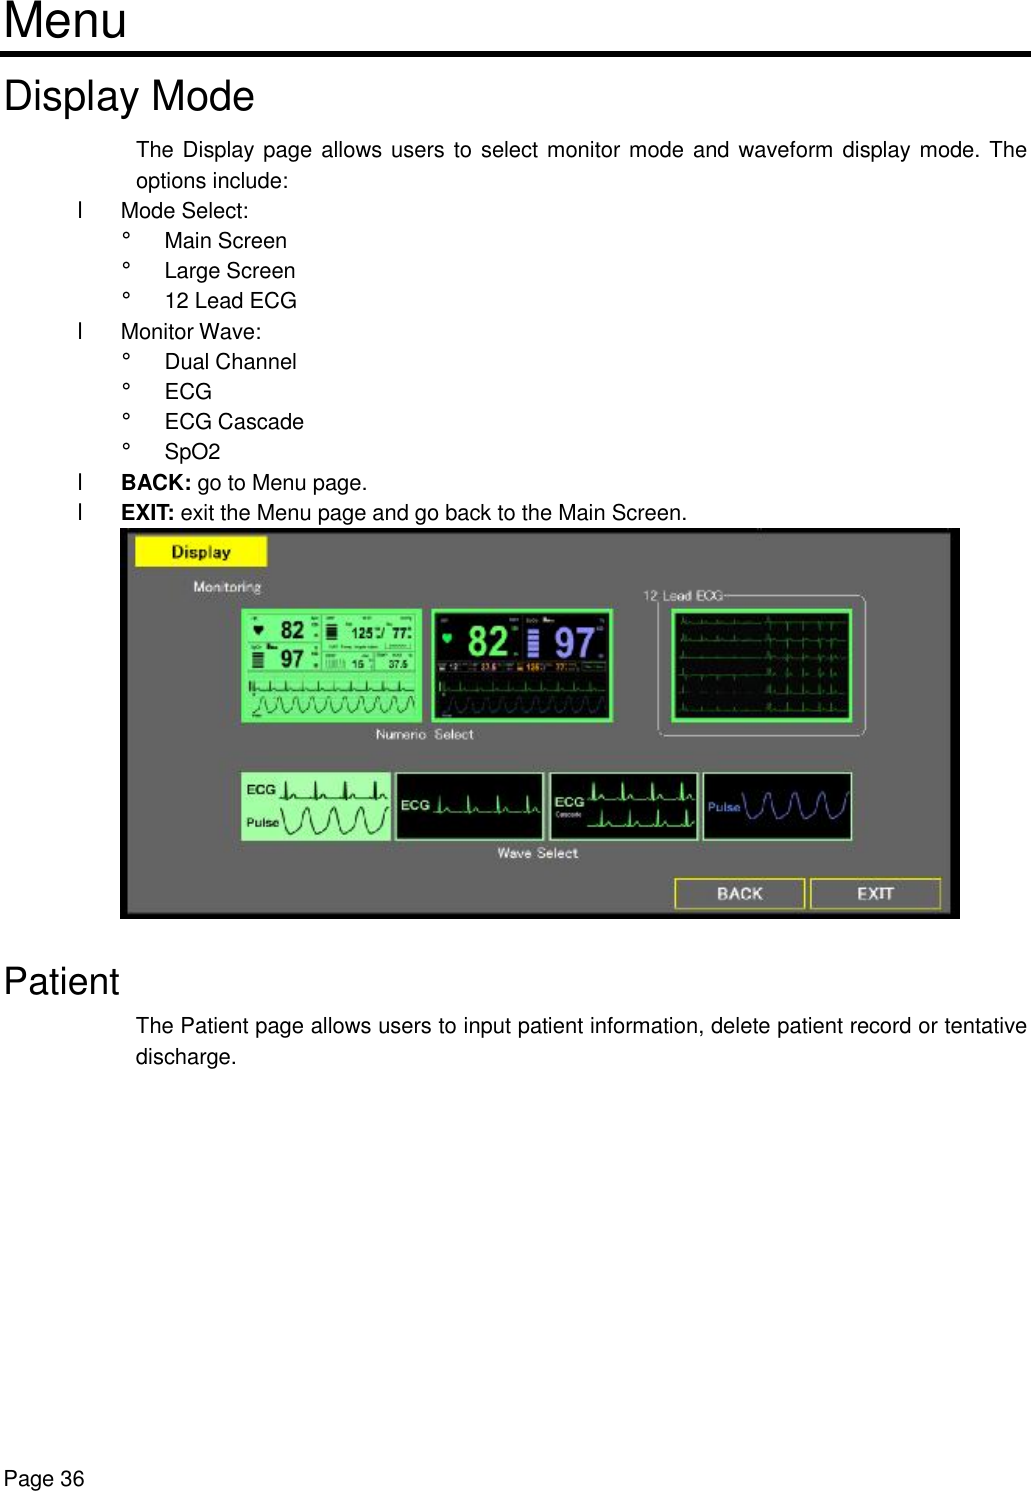    Page 36 Menu Display Mode The Display page allows users to select monitor mode and waveform display mode. The options include: l Mode Select:  ¡ Main Screen ¡ Large Screen  ¡ 12 Lead ECG l Monitor Wave:  ¡ Dual Channel ¡ ECG ¡ ECG Cascade  ¡ SpO2 l BACK: go to Menu page. l EXIT: exit the Menu page and go back to the Main Screen.   Patient The Patient page allows users to input patient information, delete patient record or tentative discharge.  